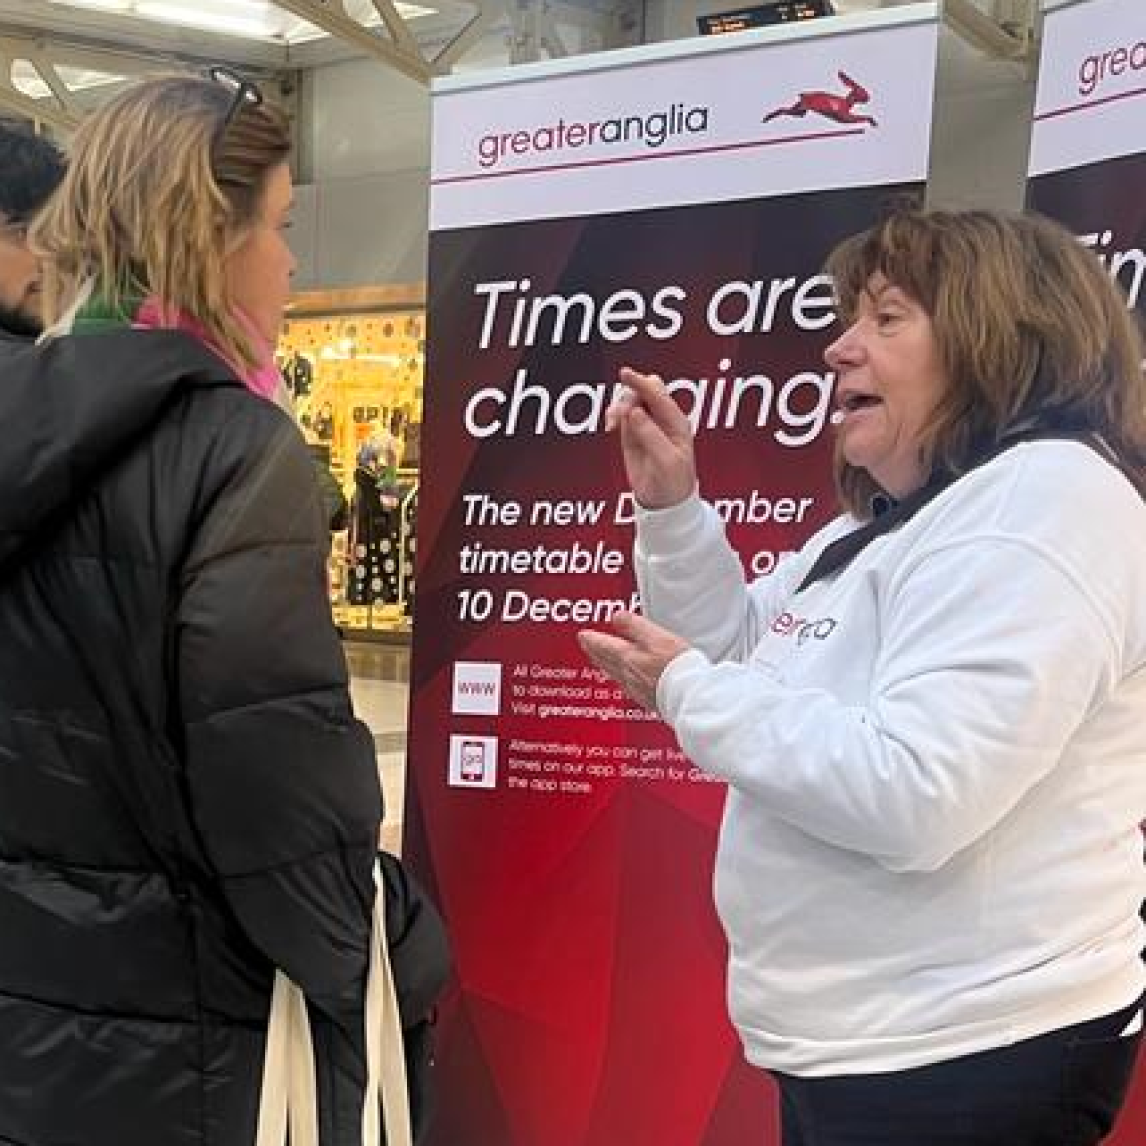 Customers being told about Greater Anglia timetable changes